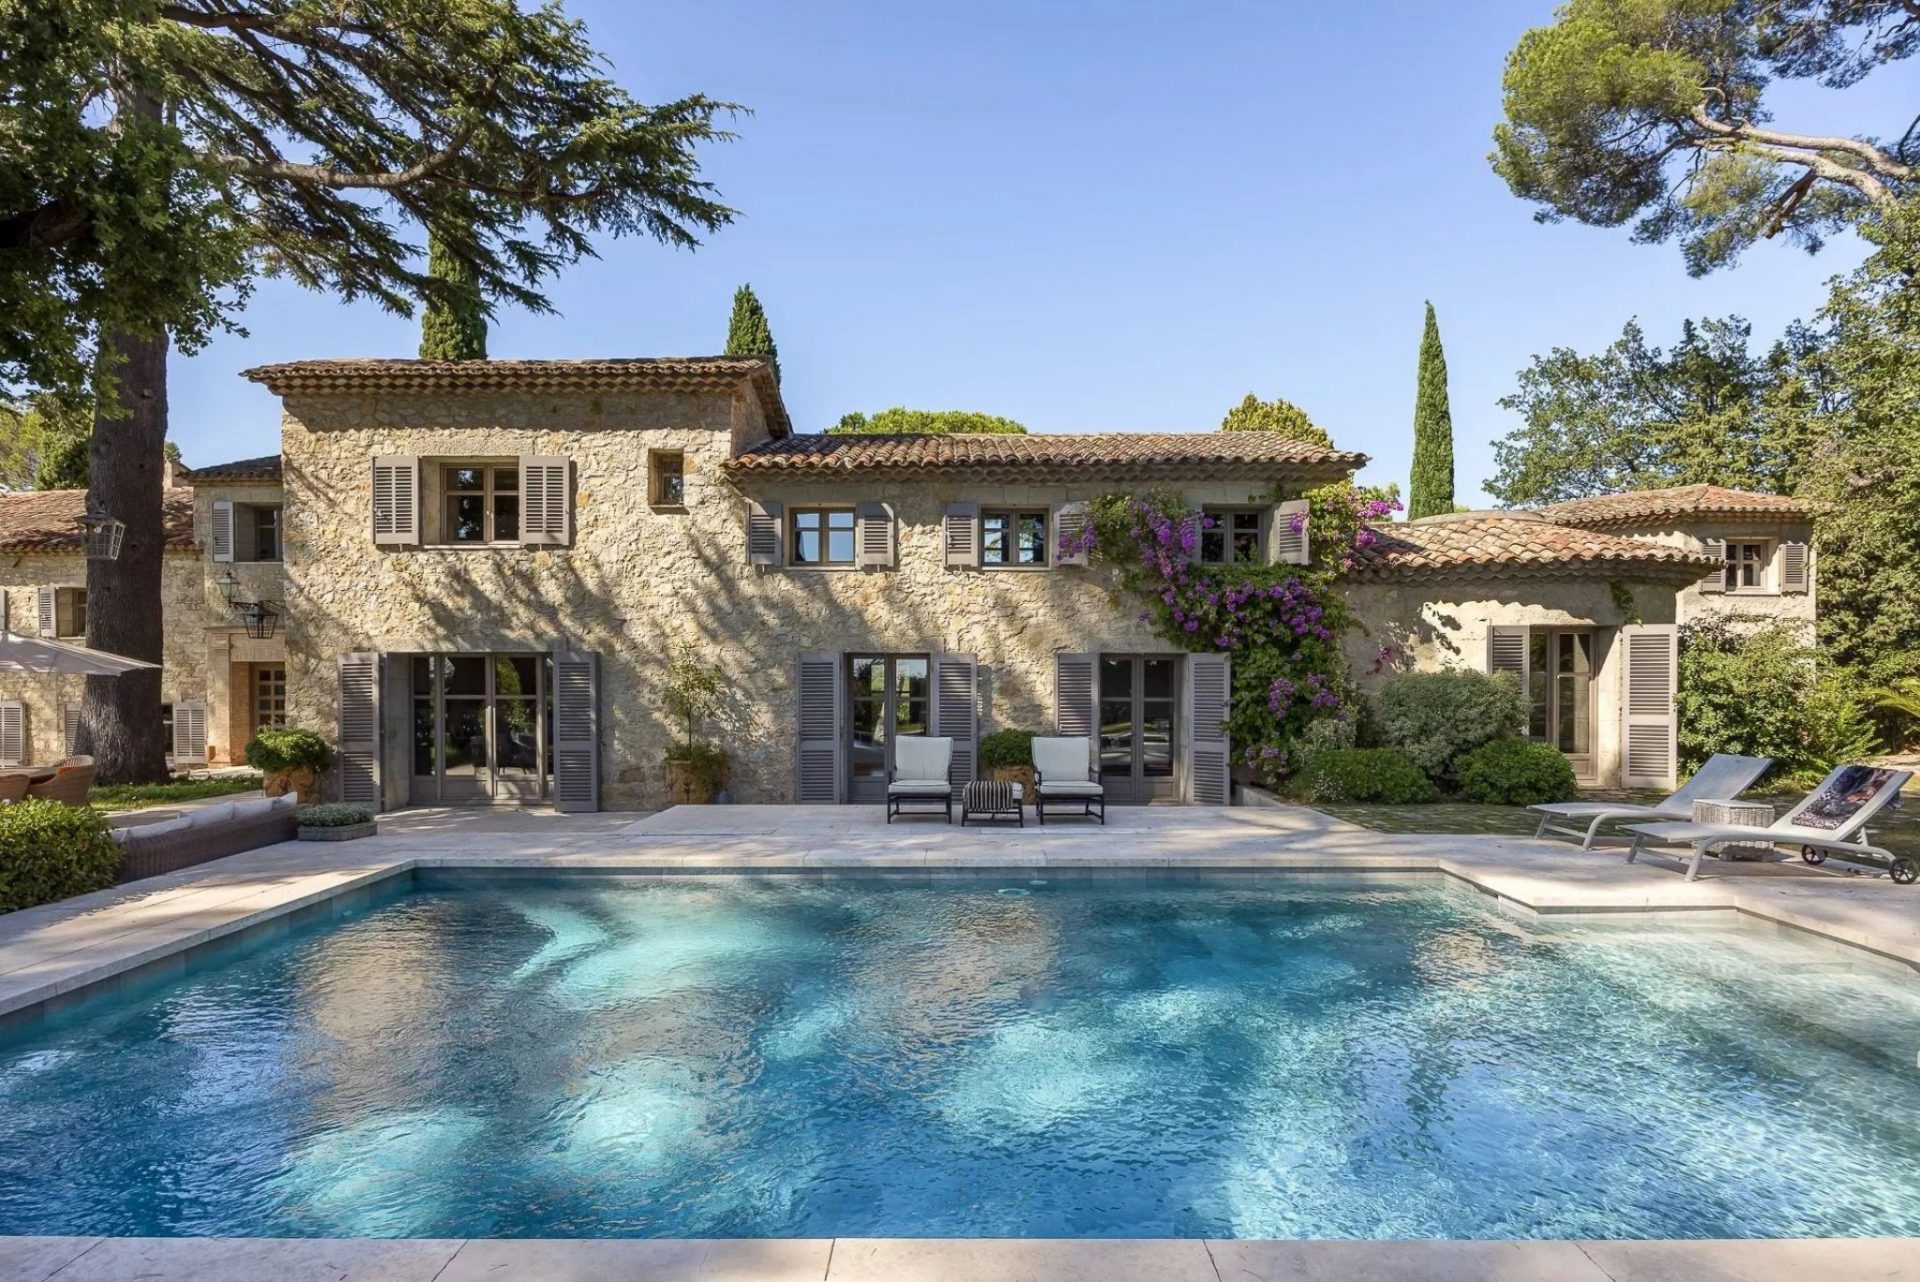 Luxury Real Estate in France